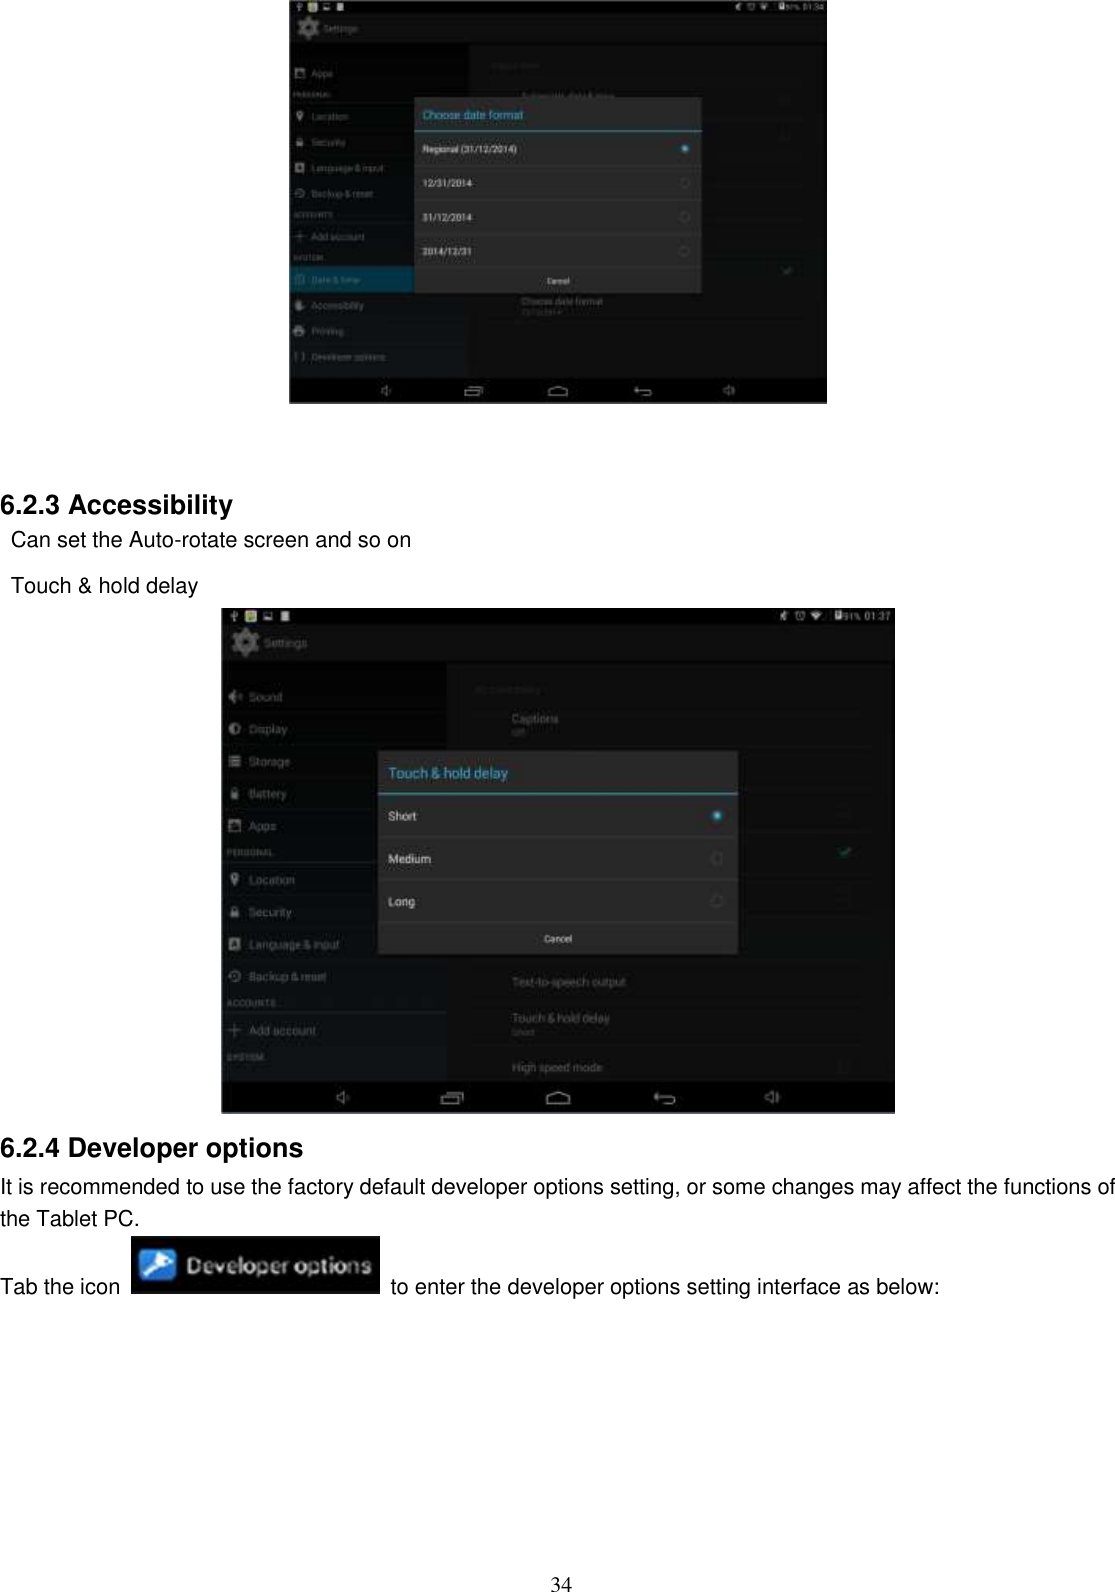  34    6.2.3 Accessibility   Can set the Auto-rotate screen and so on   Touch &amp; hold delay  6.2.4 Developer options It is recommended to use the factory default developer options setting, or some changes may affect the functions of the Tablet PC. Tab the icon    to enter the developer options setting interface as below: 